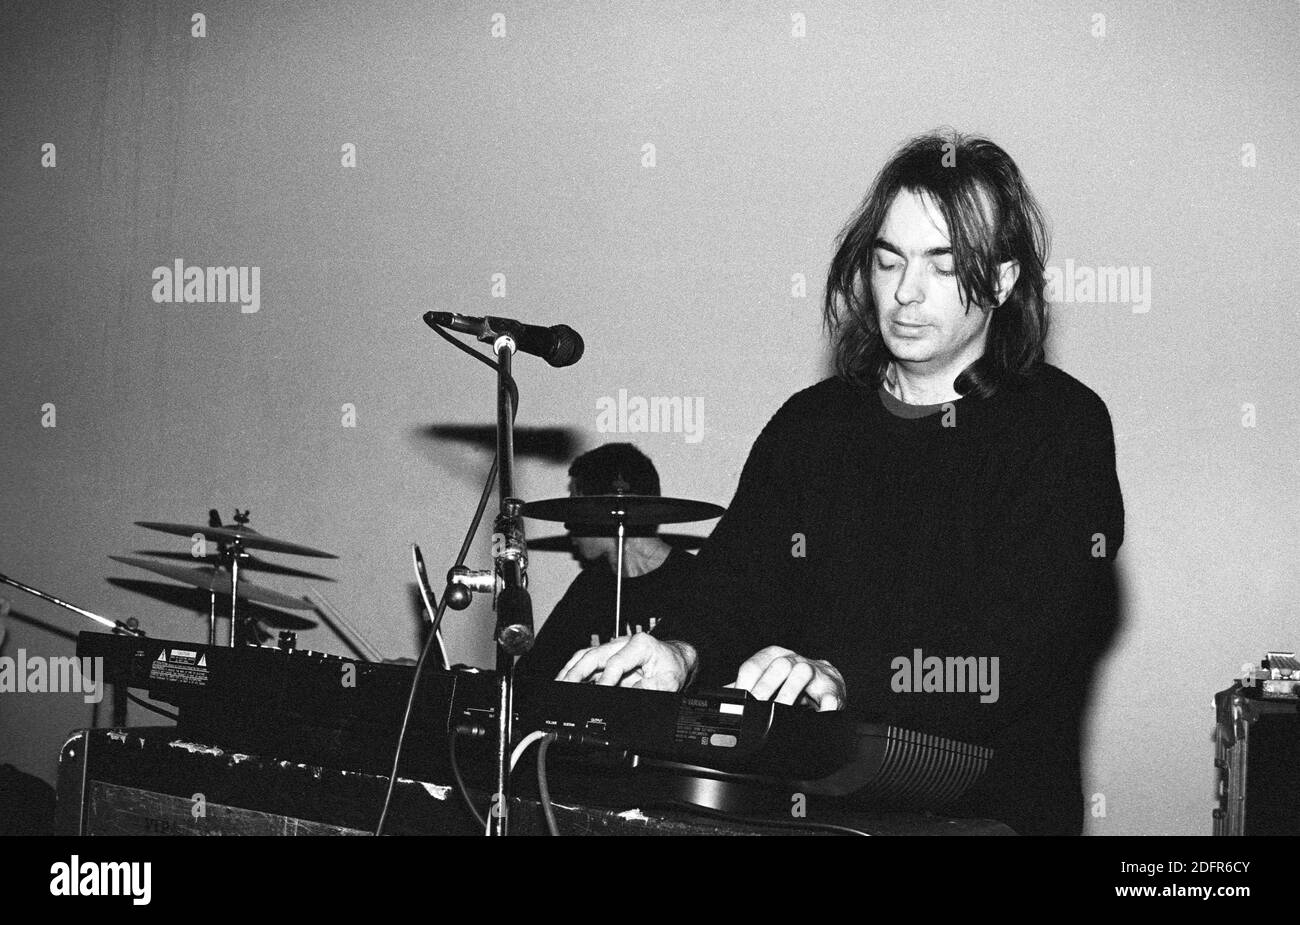 Keyboard player Andrew Todd performing with The Chills at the Bowen West Theatre, Bedford, UK, 3rd March 1990. Stock Photo